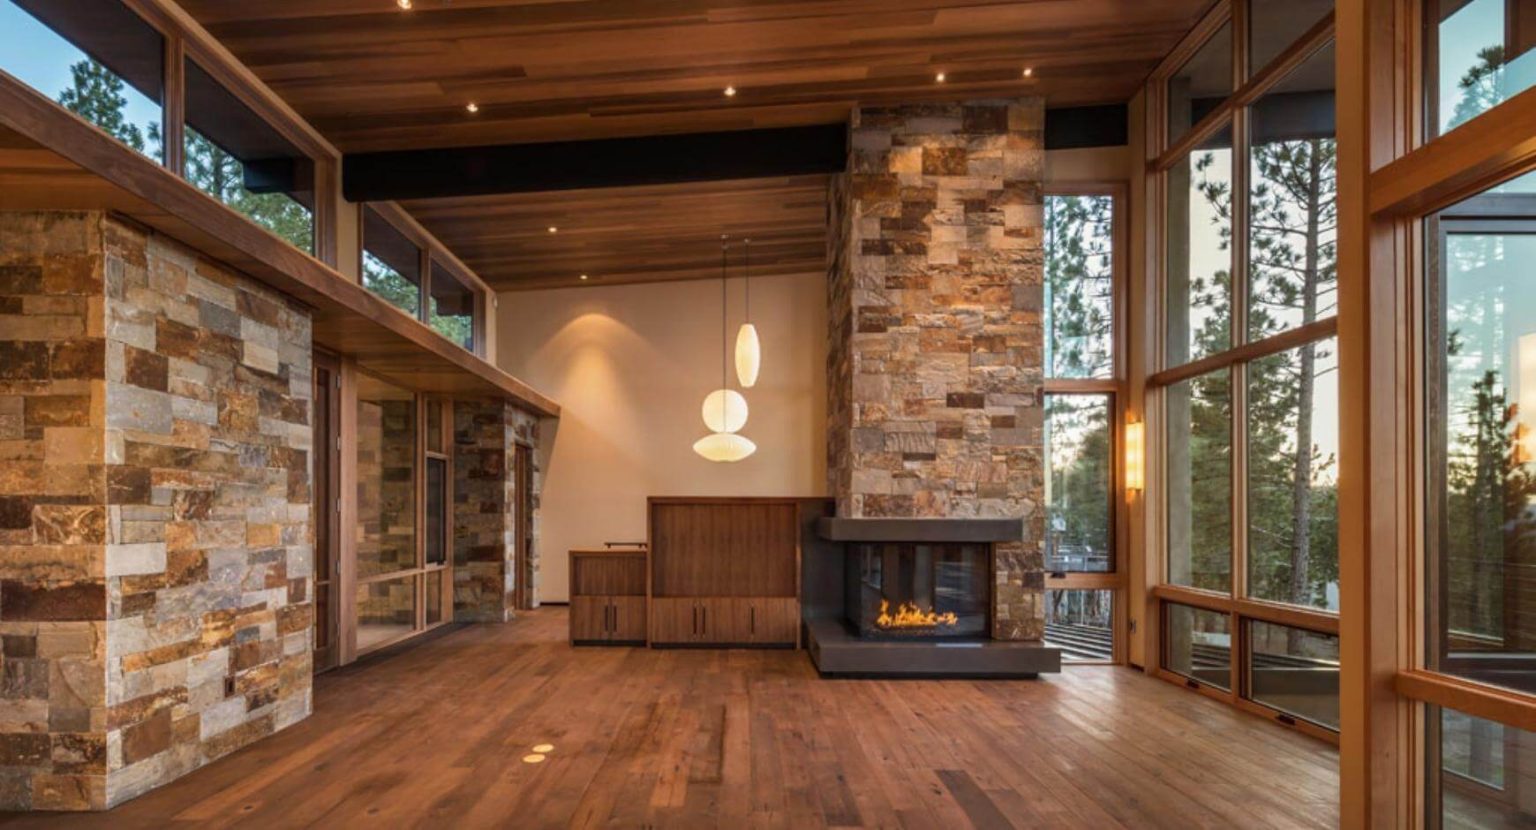 15 Inspirational Designs for a Living Room Fireplace